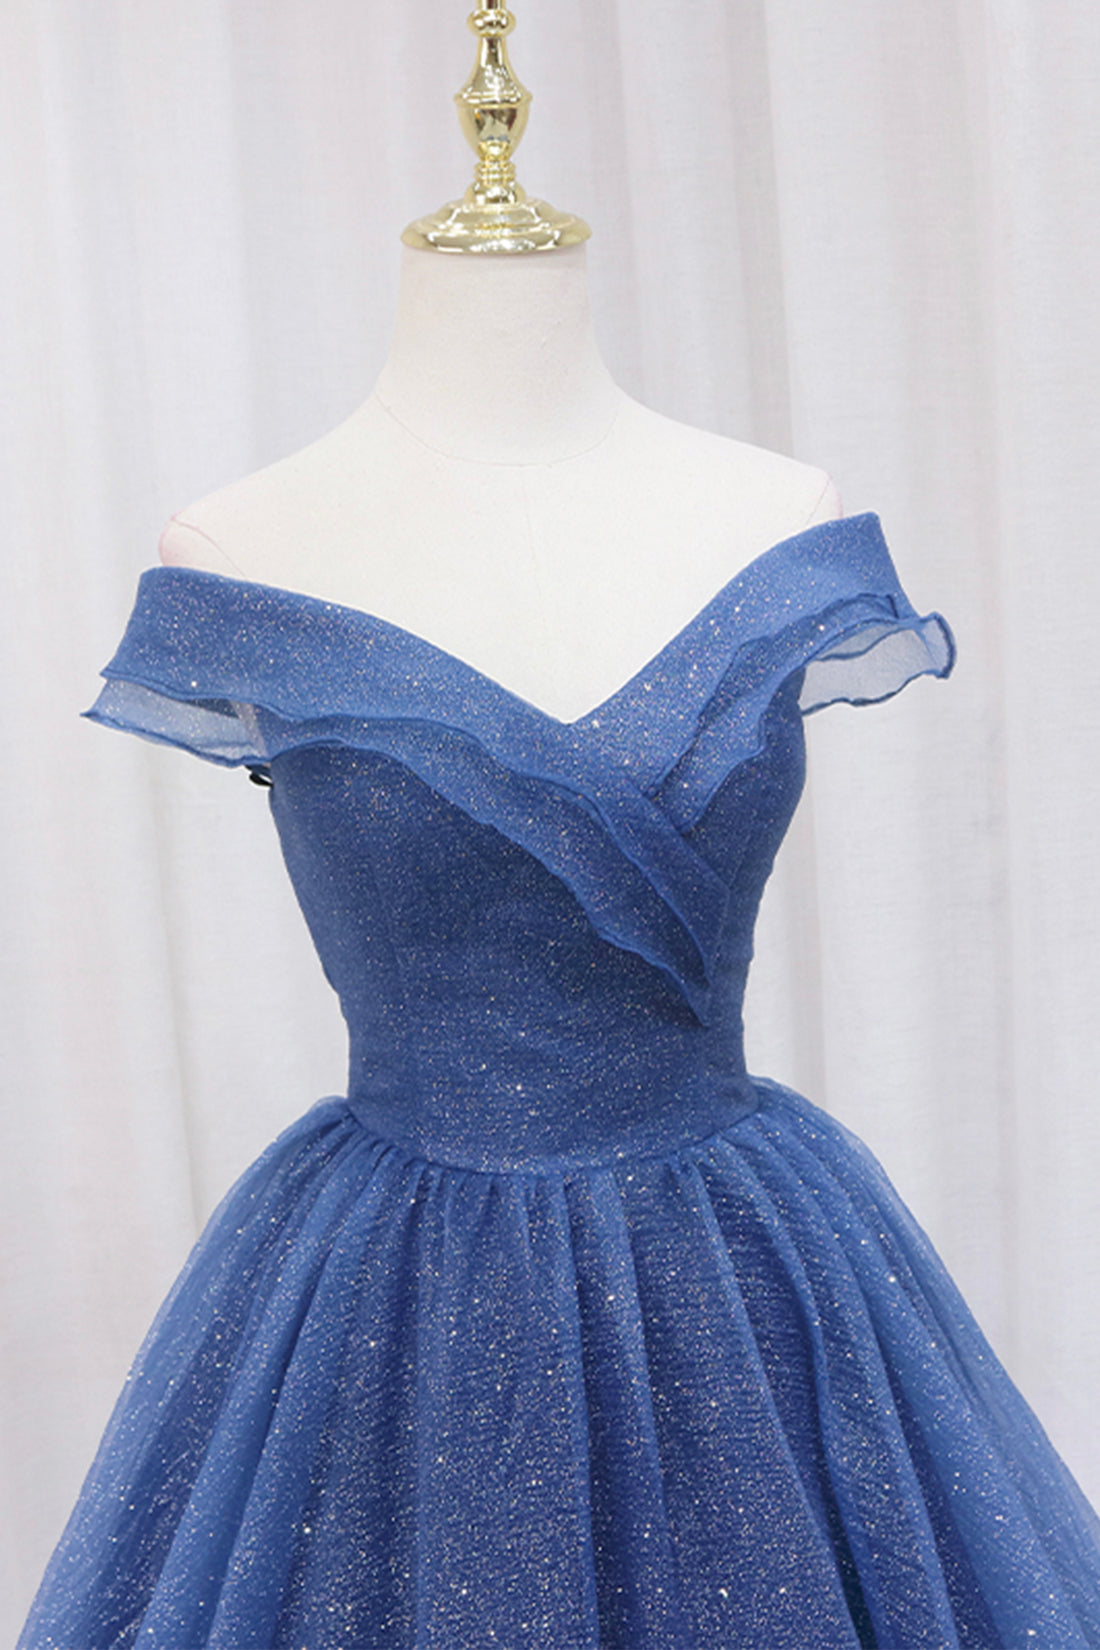 Bridesmaide Dresses Fall, Blue Off the Shoulder Long Party Dress Evening Gown, Blue Junior Prom Dress